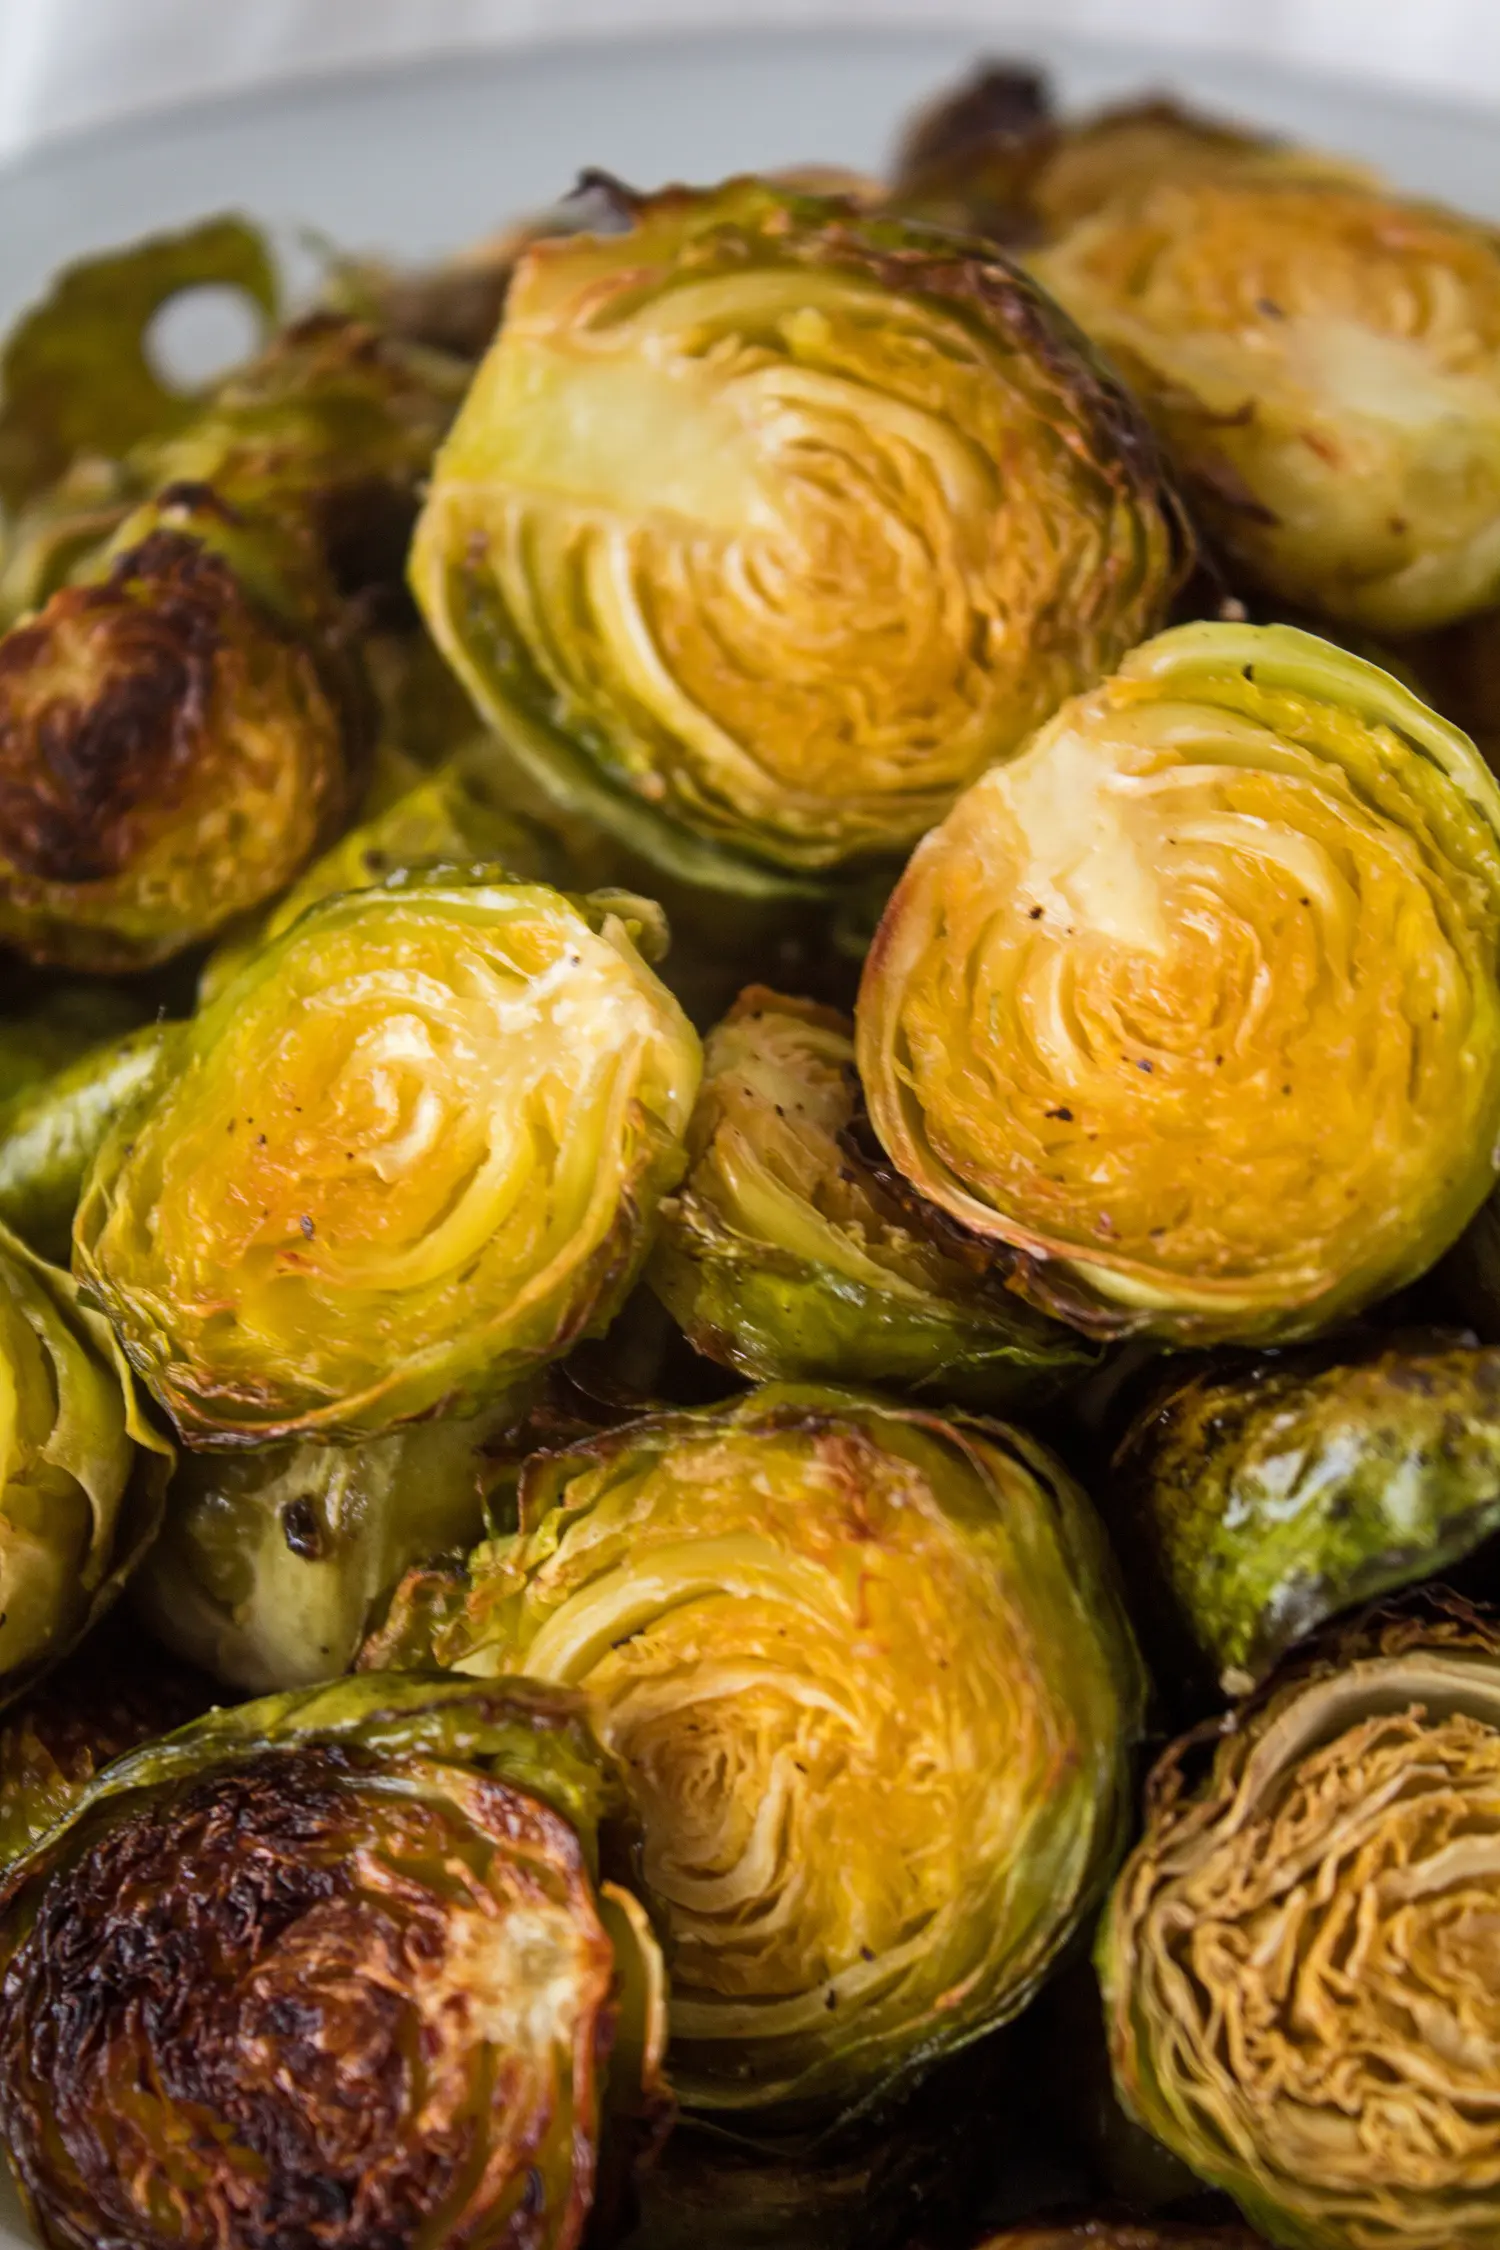 Close up vertical image of roasted brussel sprouts showing golden caramelized color.